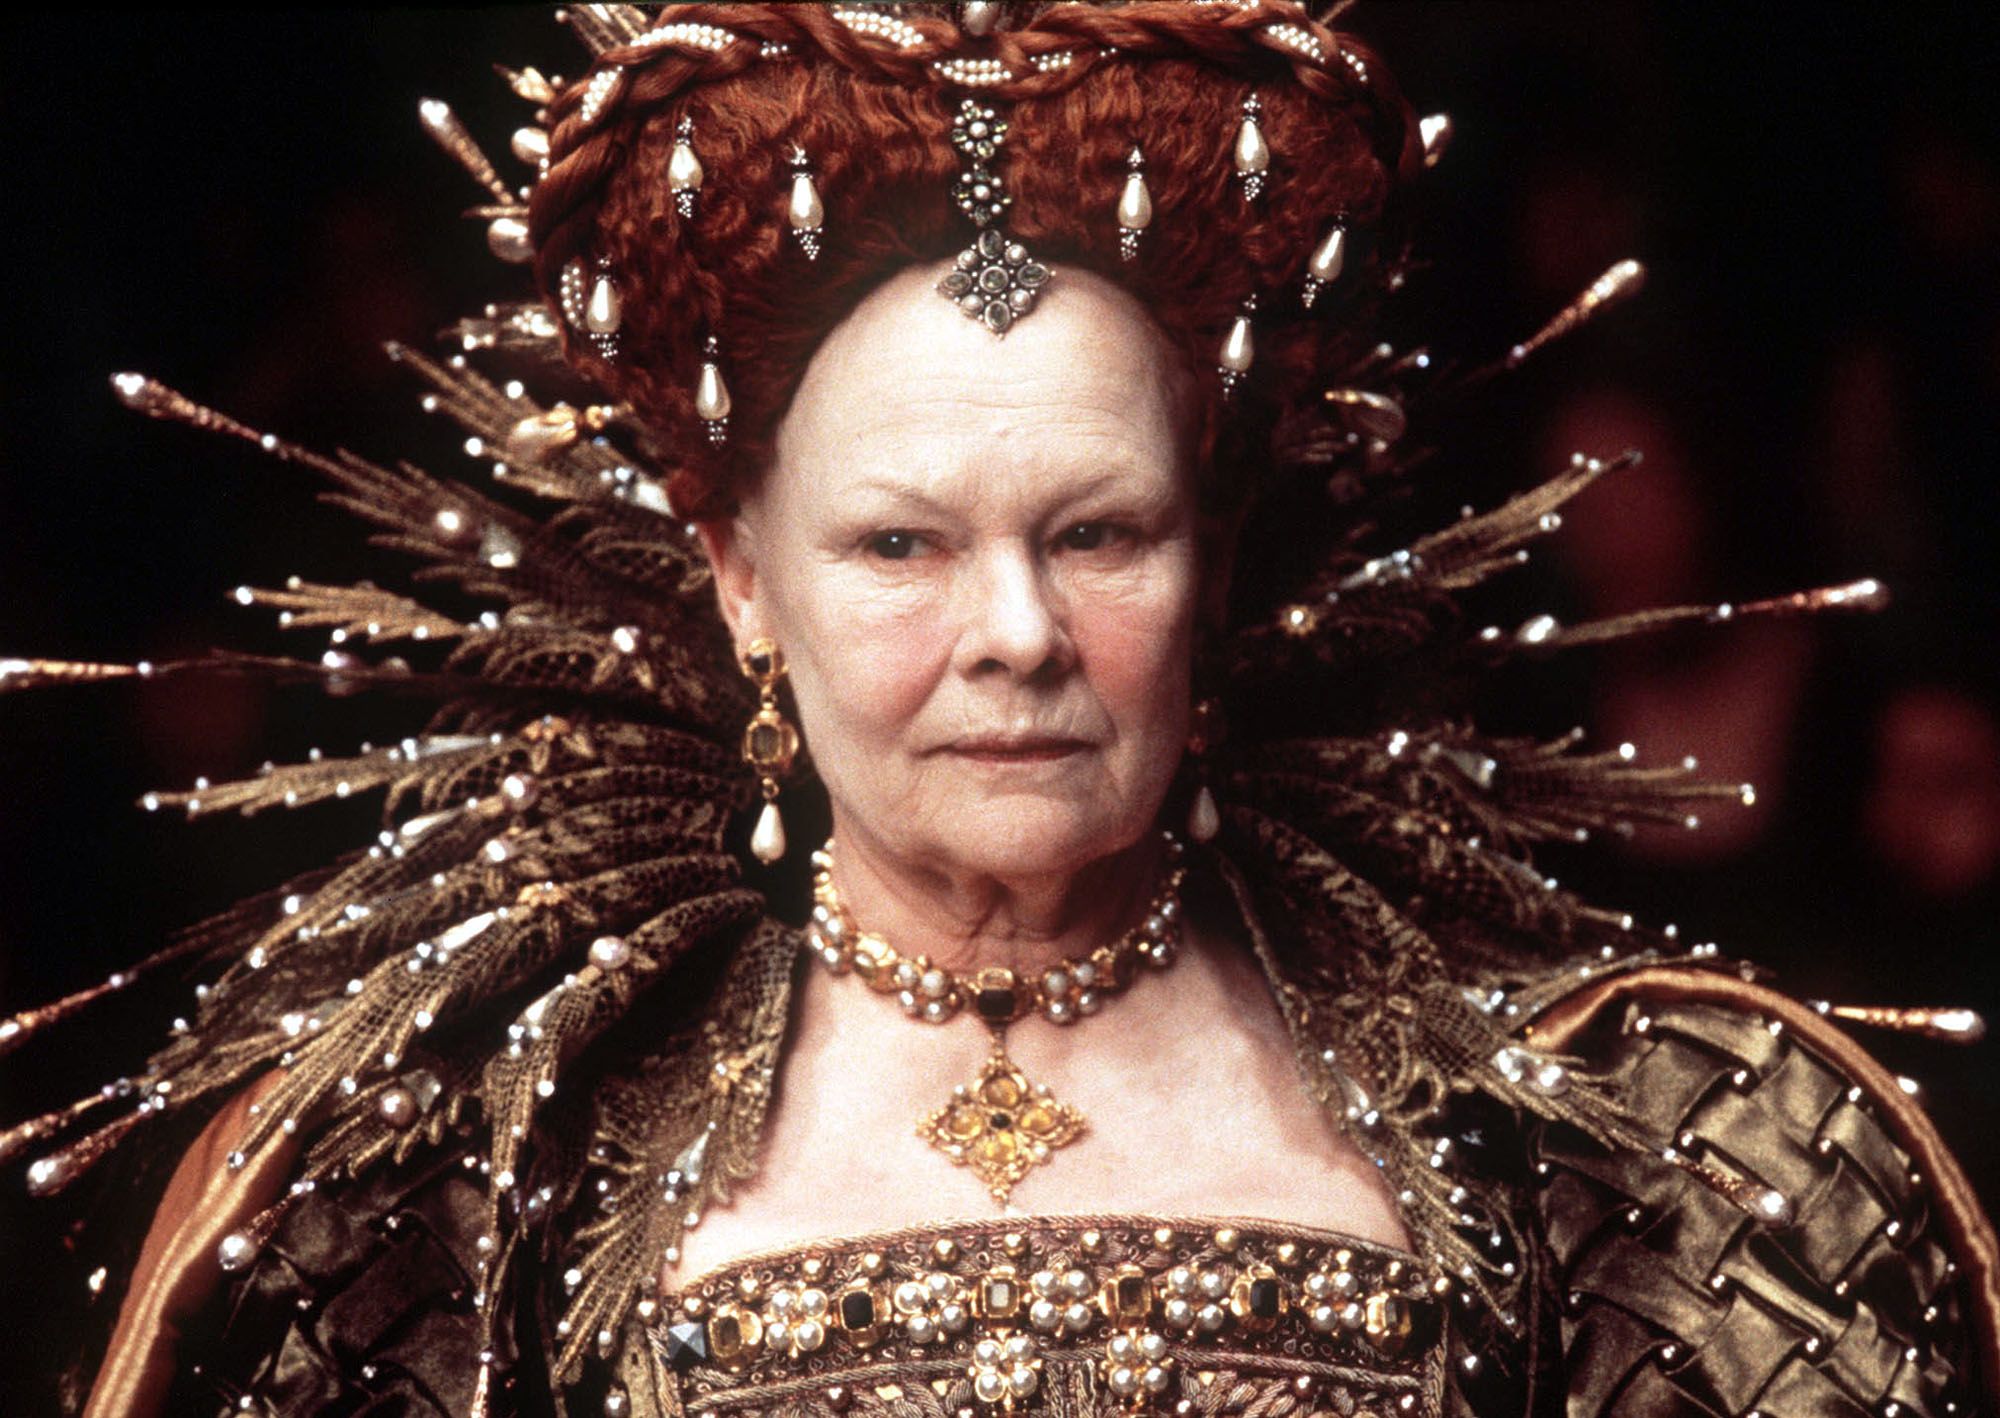 Judy Dench as Queen Elizabeth I in the 1998 film "Shakespeare in Love" for which she won the Oscar for Best Actress in a Supporting Role | Photo: Getty Images